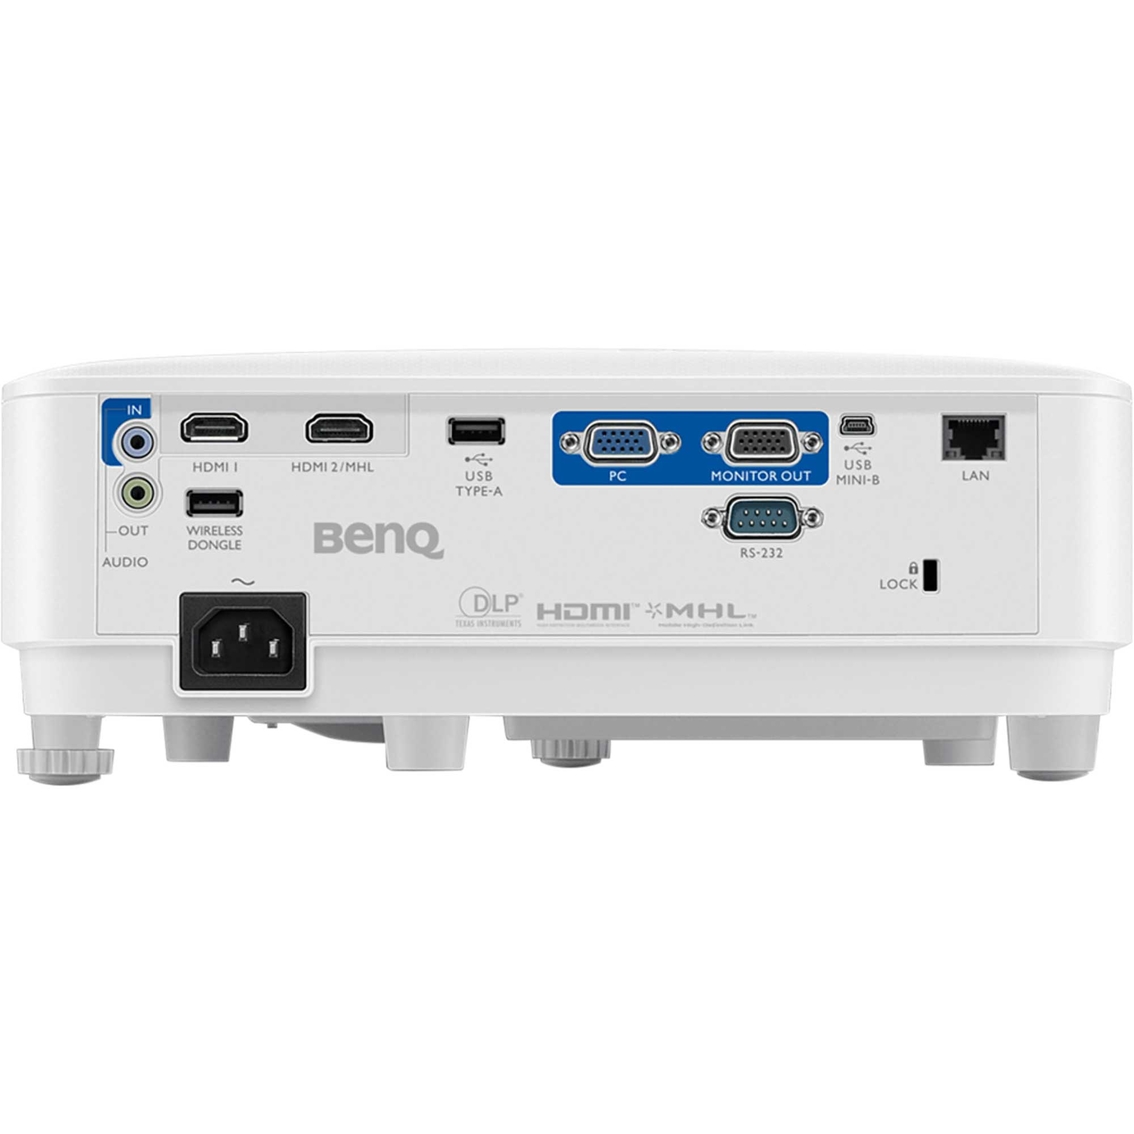 BenQ 4000 lumens Full HD Network Business Projector - Image 3 of 4